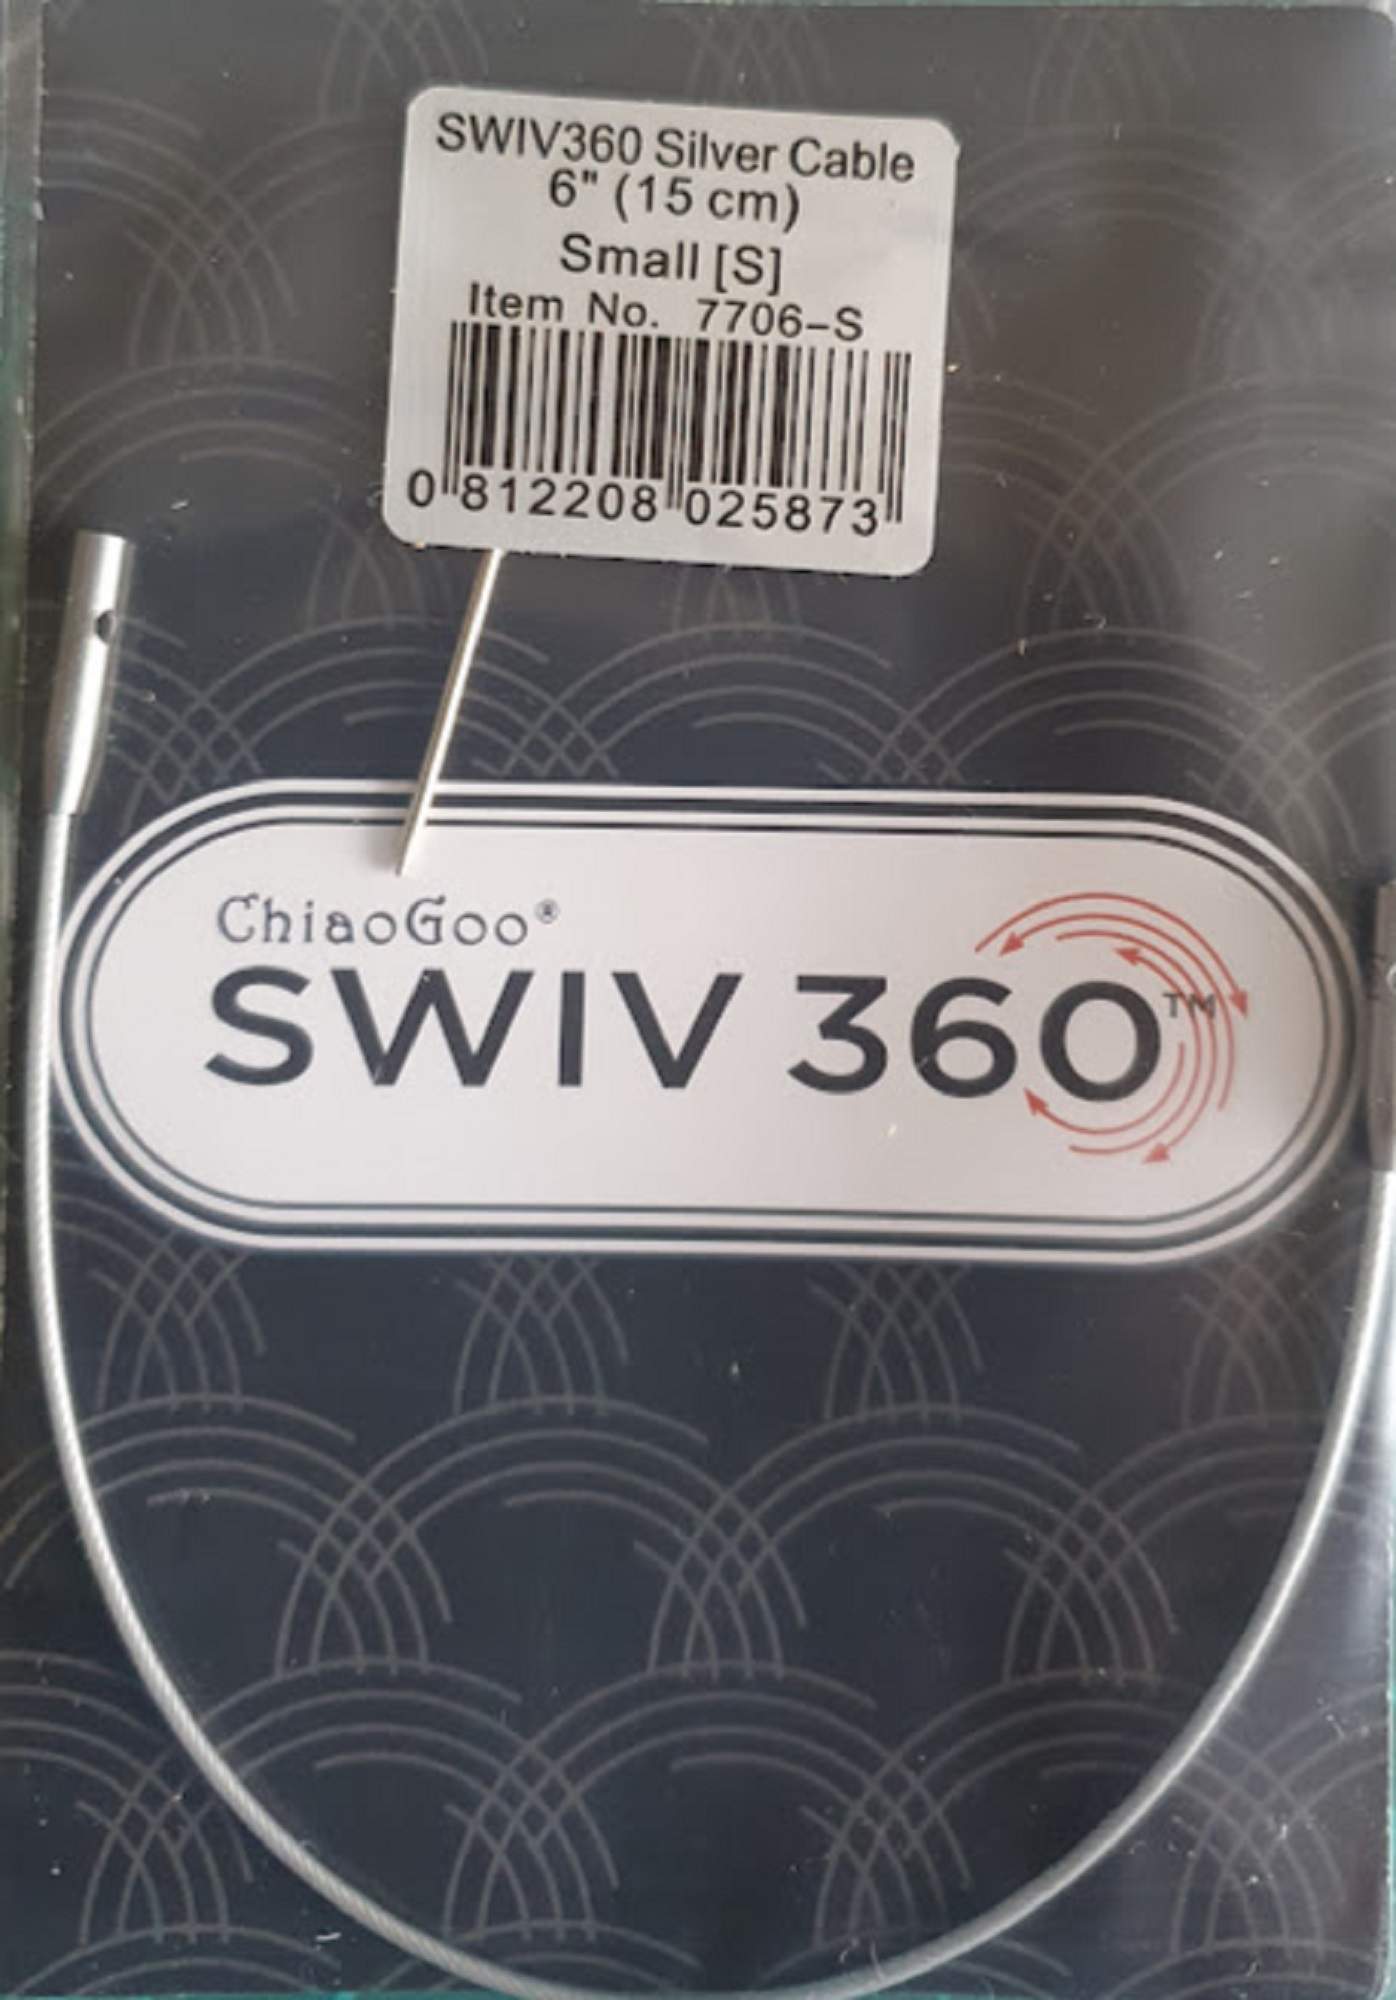 ChiaoGoo Swiv 360 Interchangeable Cables